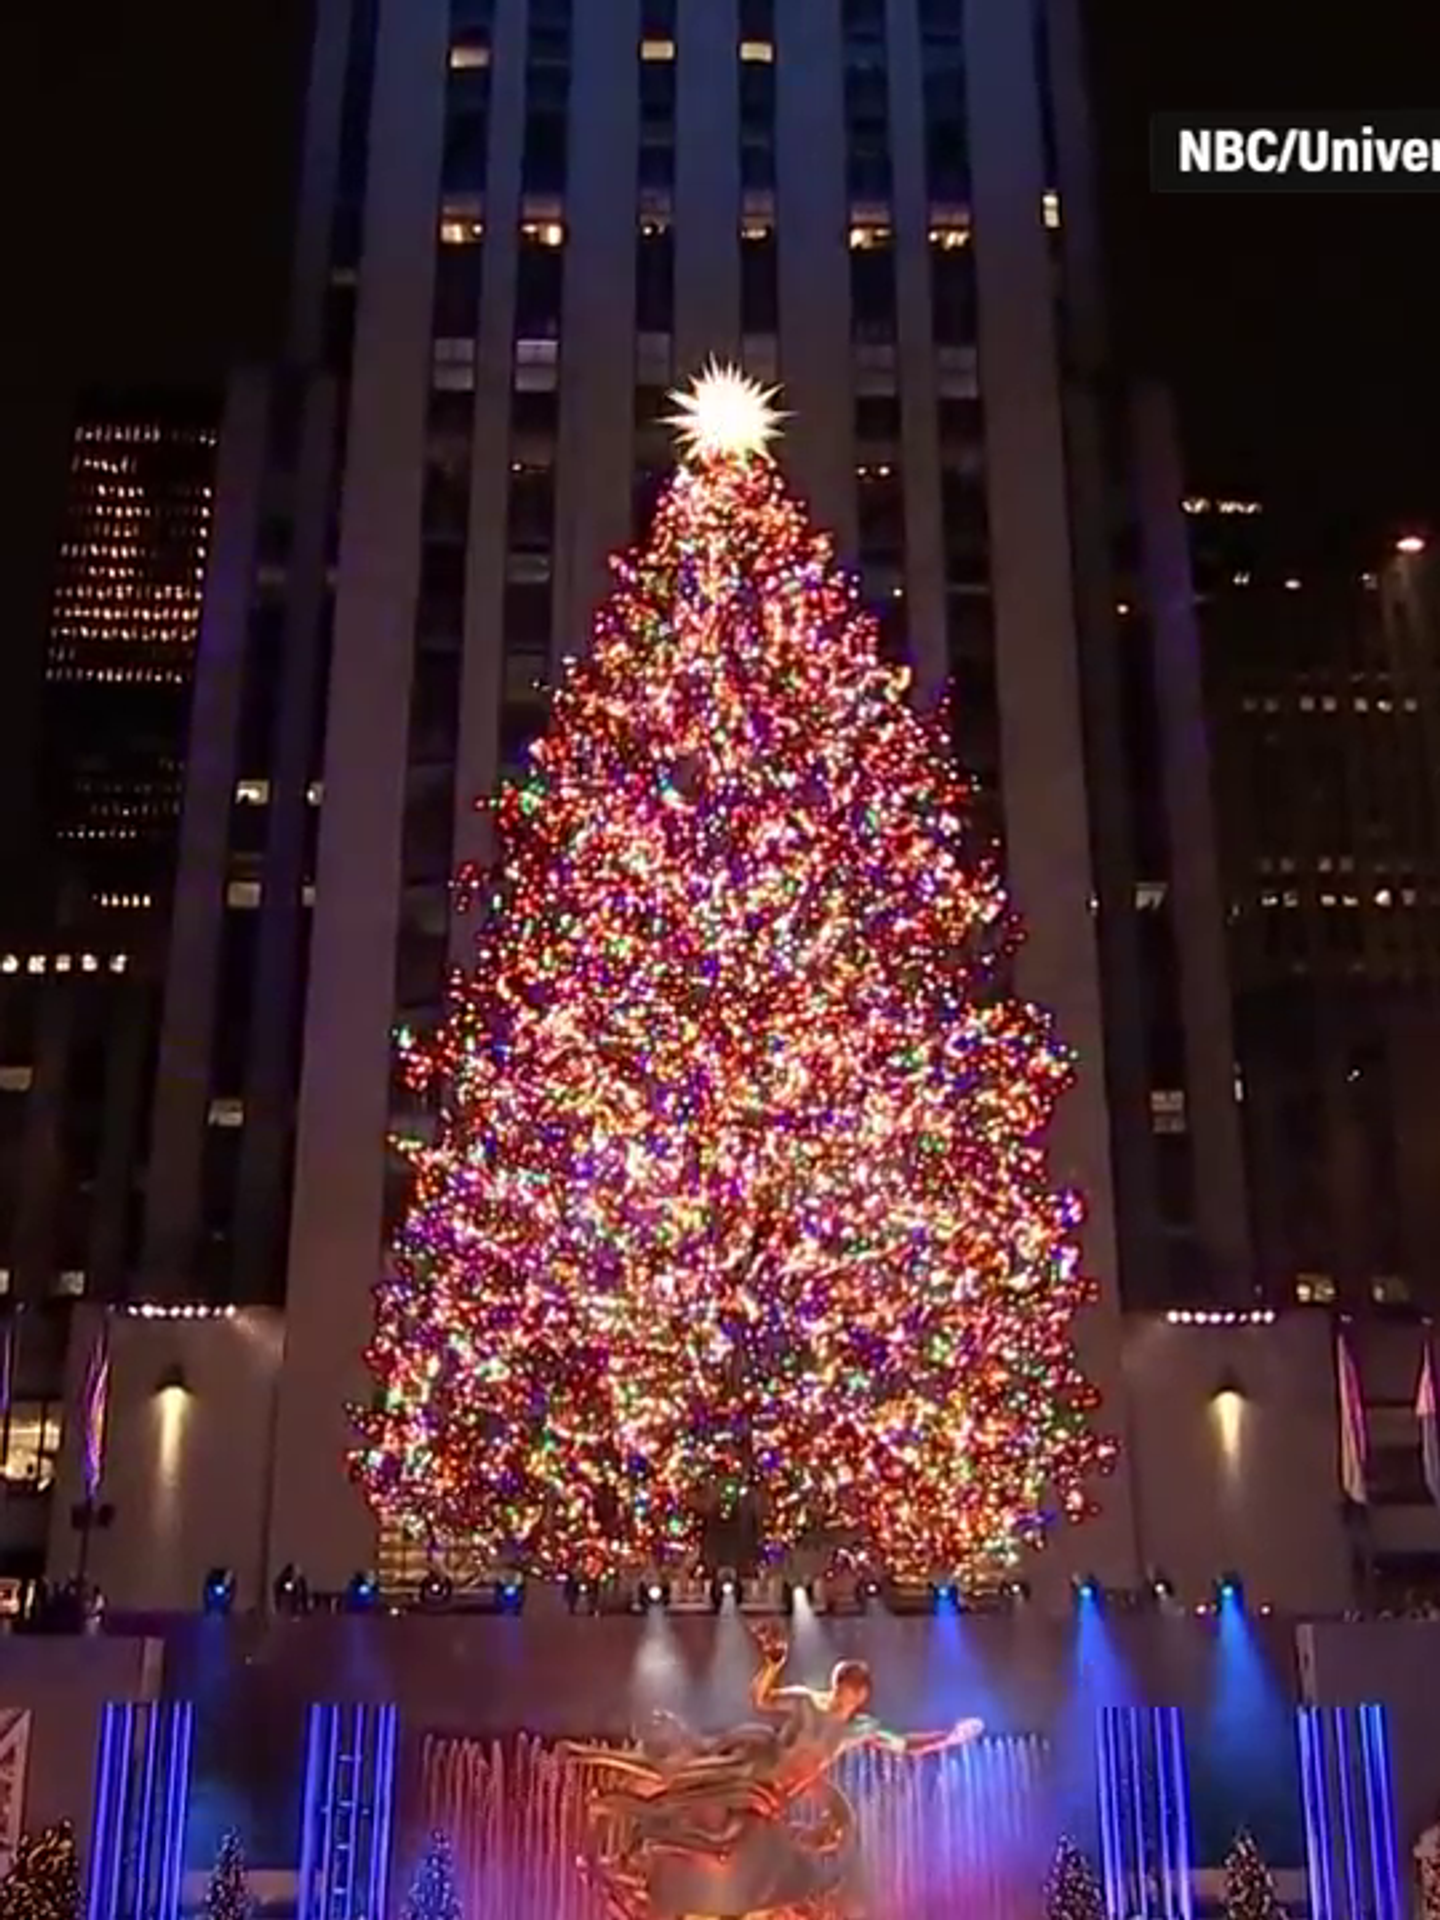 WATCH: The famous Rockefeller Christmas tree lights up for the season